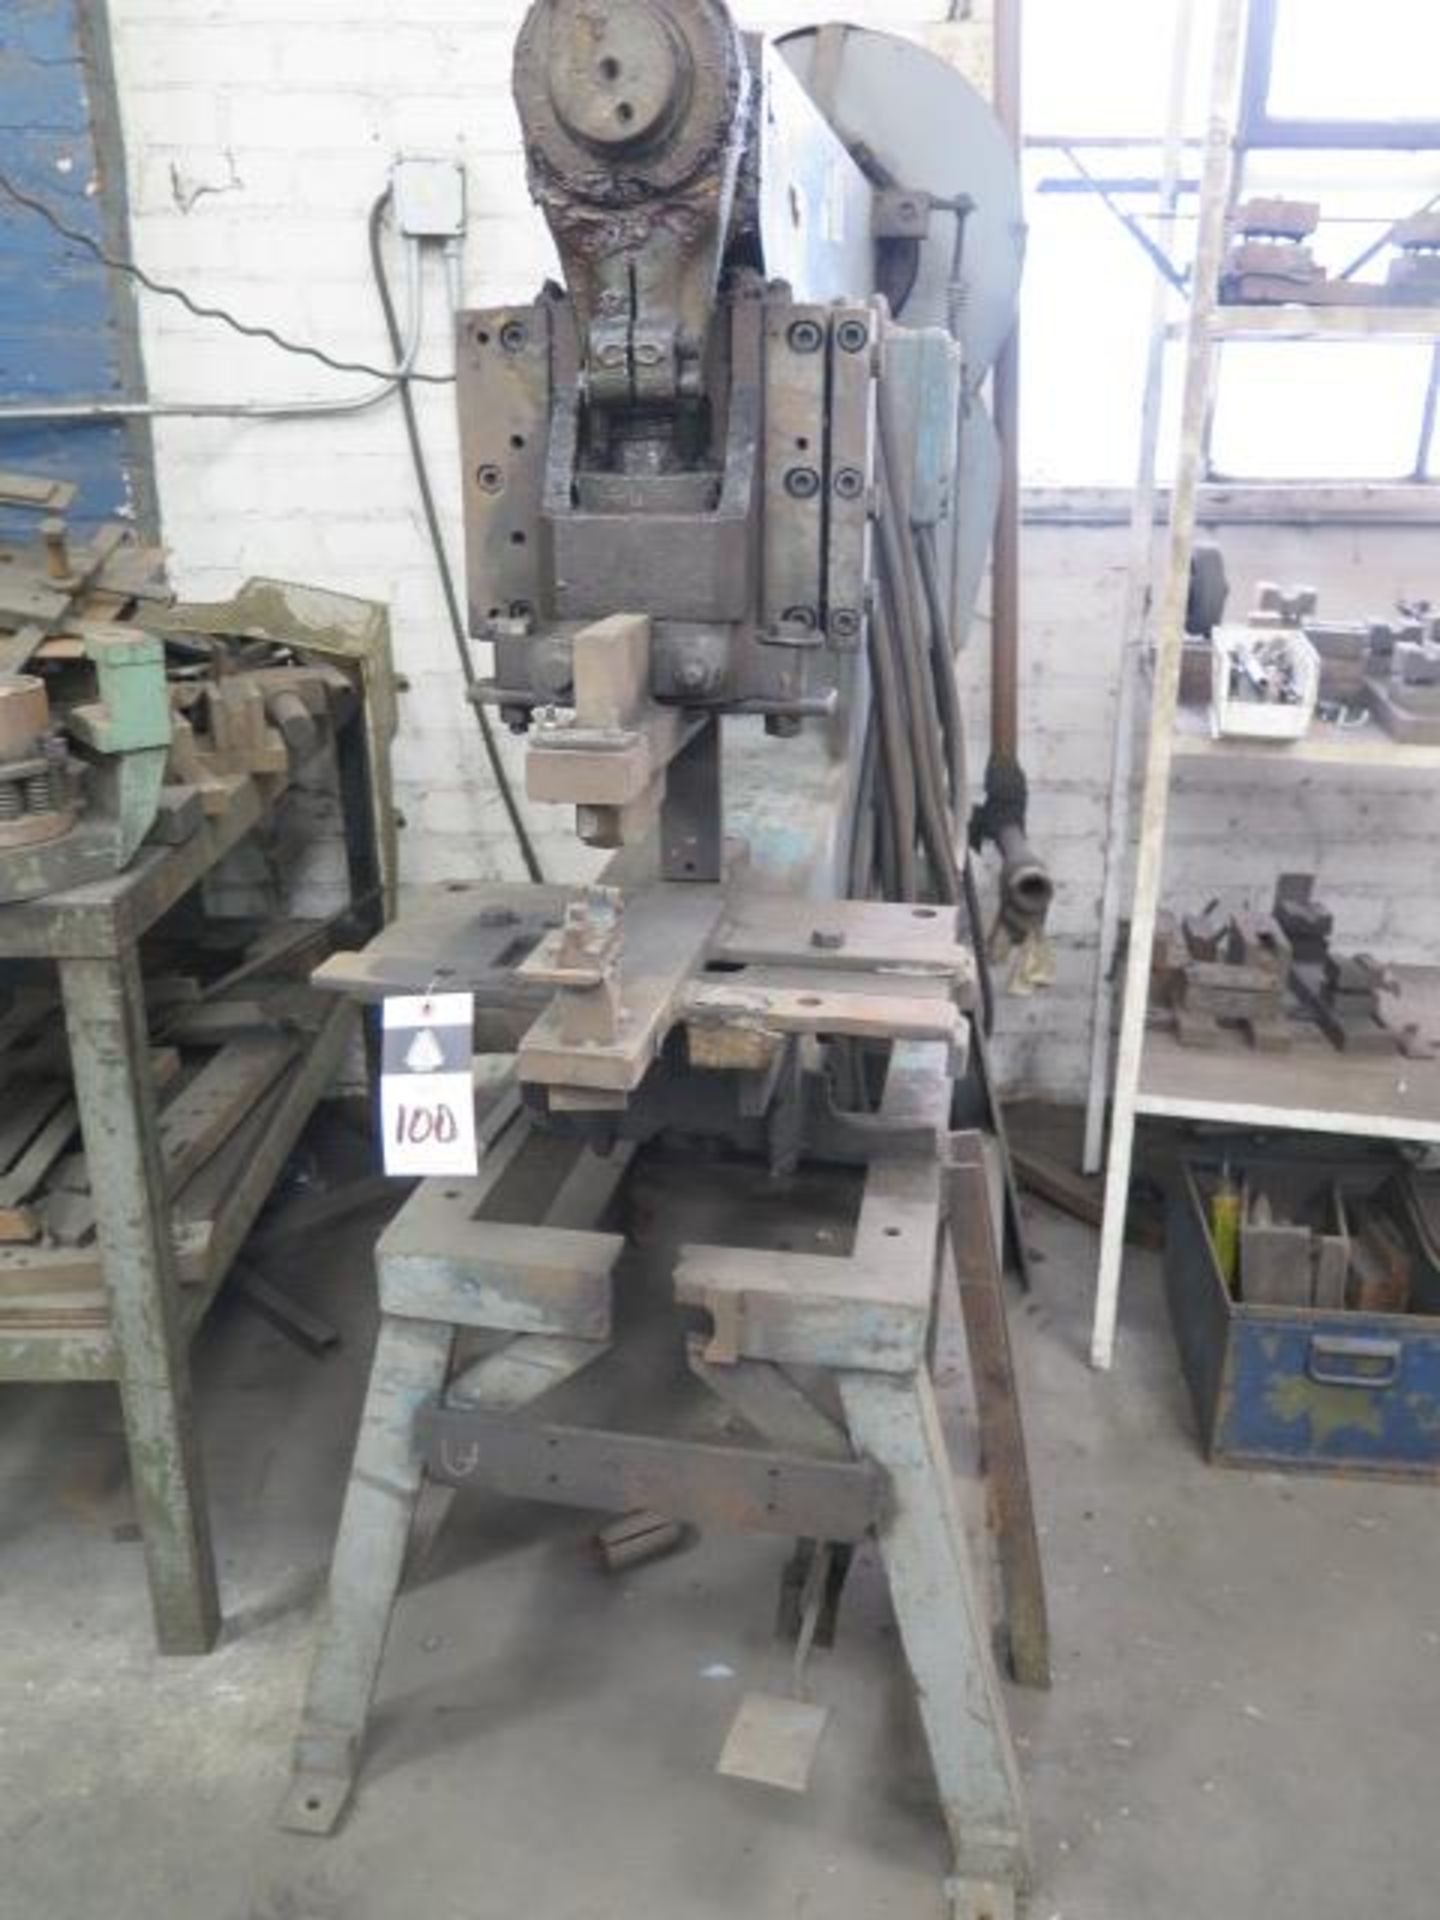 Whitney-Jensen mdl. 231 Punch Press s/n 367-7-62 (FOR PARTS ONLY) (SOLD AS-IS - NO WARRANTY - Image 2 of 6